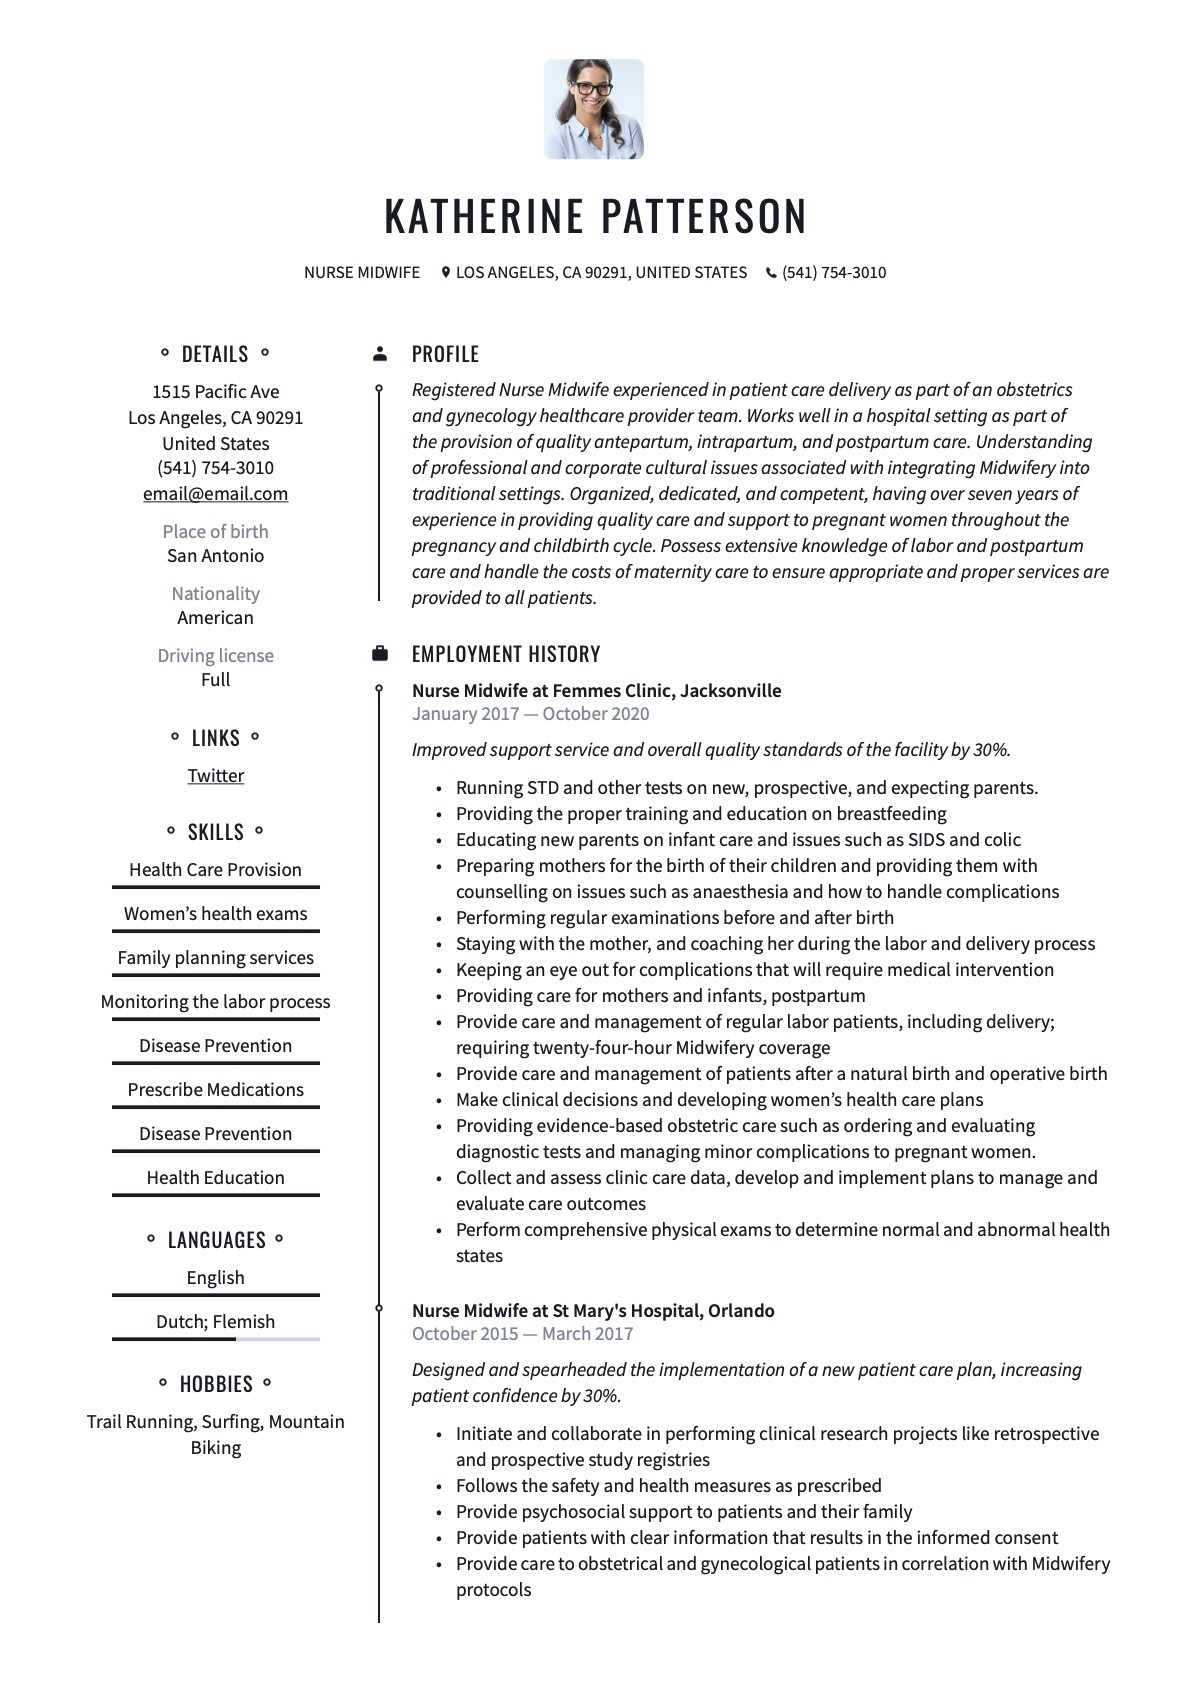 Samples Of Nursing Resumes for A Labor and Delivery Position Nurse Midwife Resume & Writing Guide  20 Templates